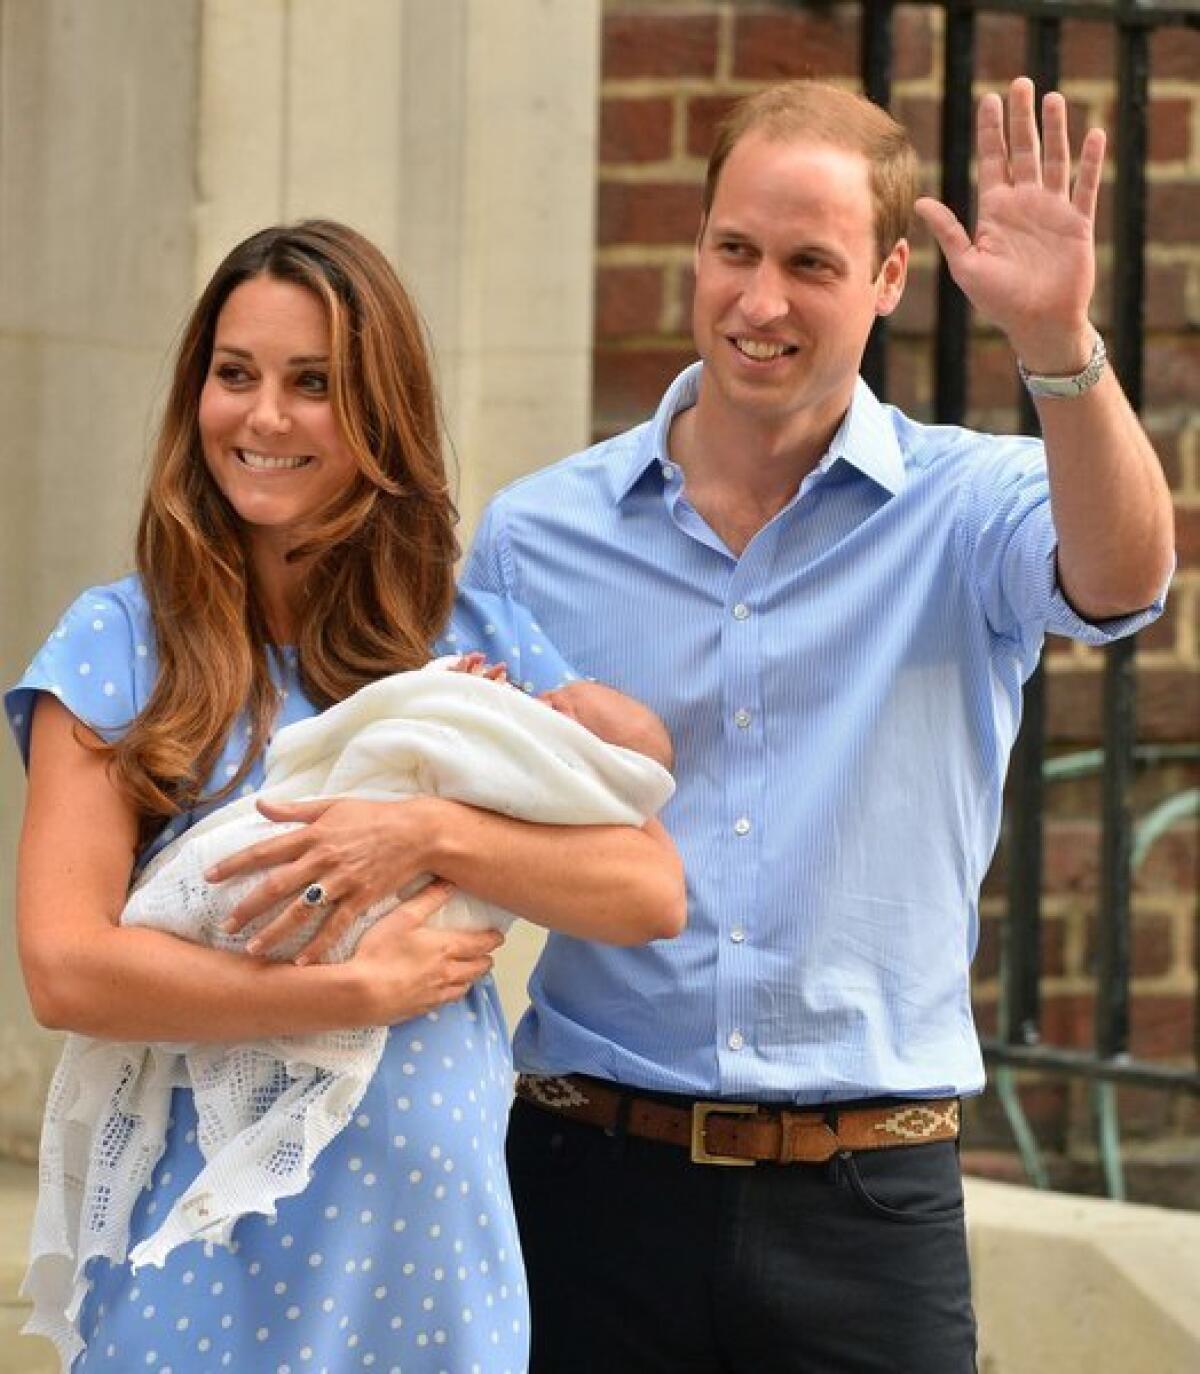 The Duchess of Cambridge and Prince William taking home their baby, swaddled in two blankets.